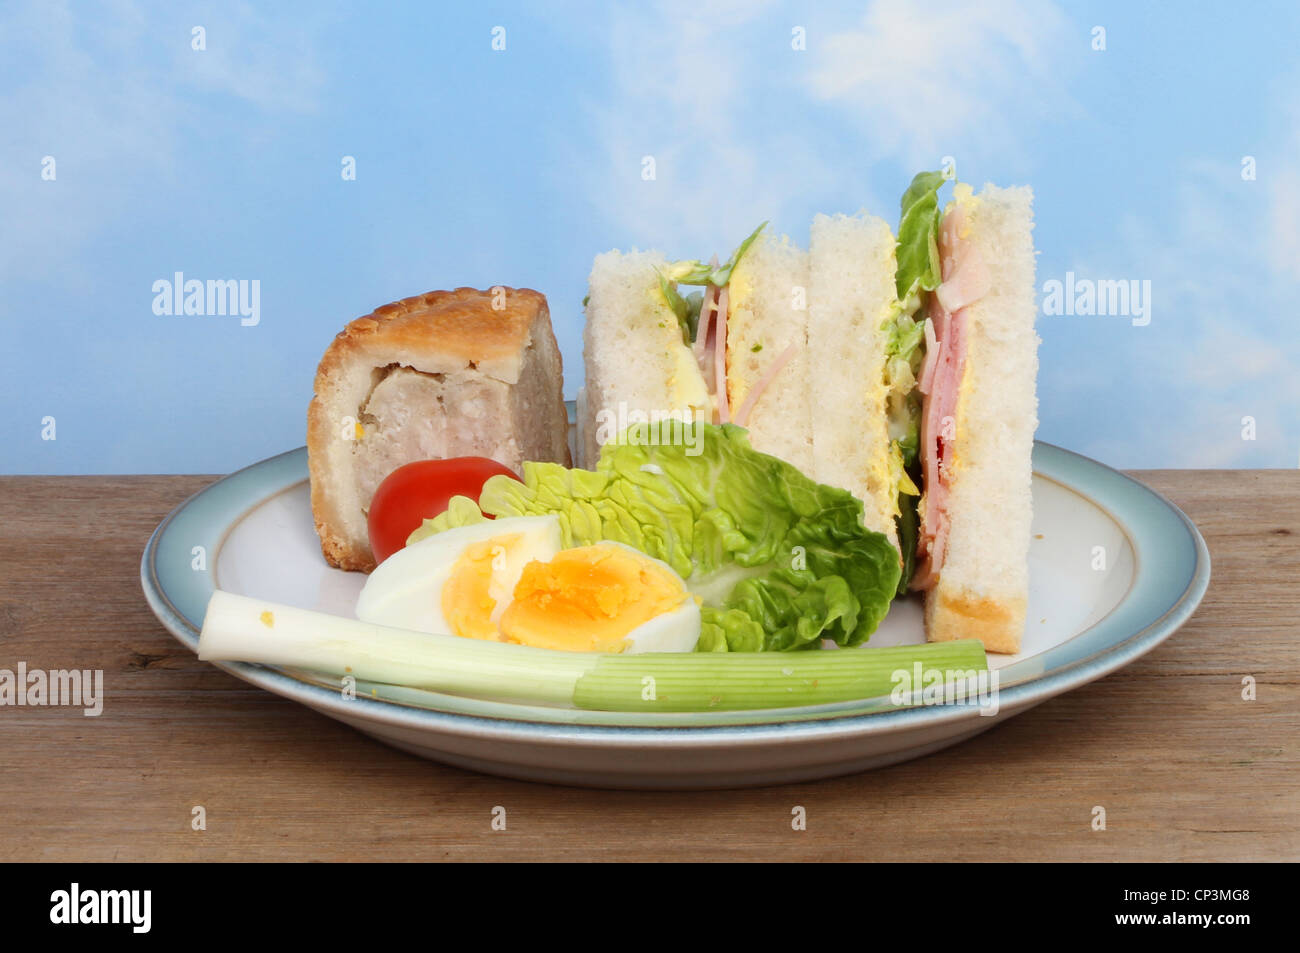 A plate of picnic food on a wooden board against a blue Summer sky Stock Photo